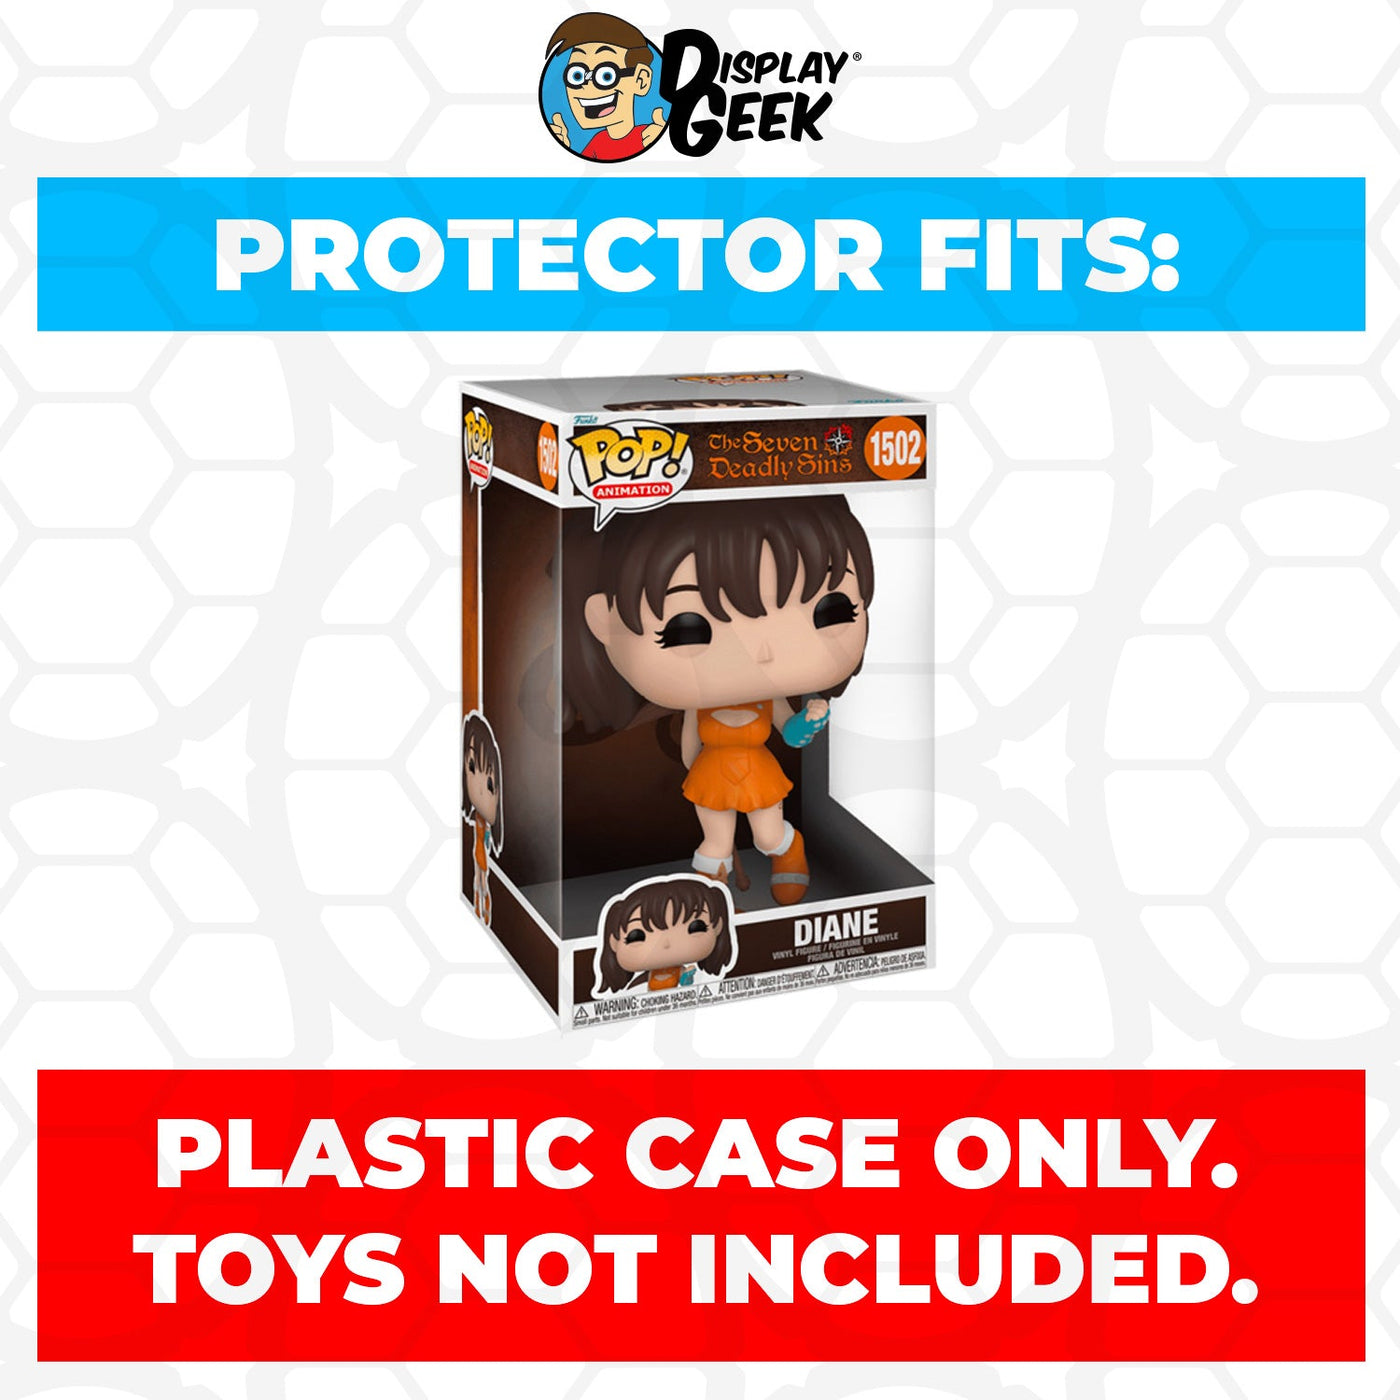 Funko POP! 10 inch The Seven Deadly Sins Diane with Gideon Hammer #1502 Jumbo Size Pop Protector Size Confirmed by Display Geek